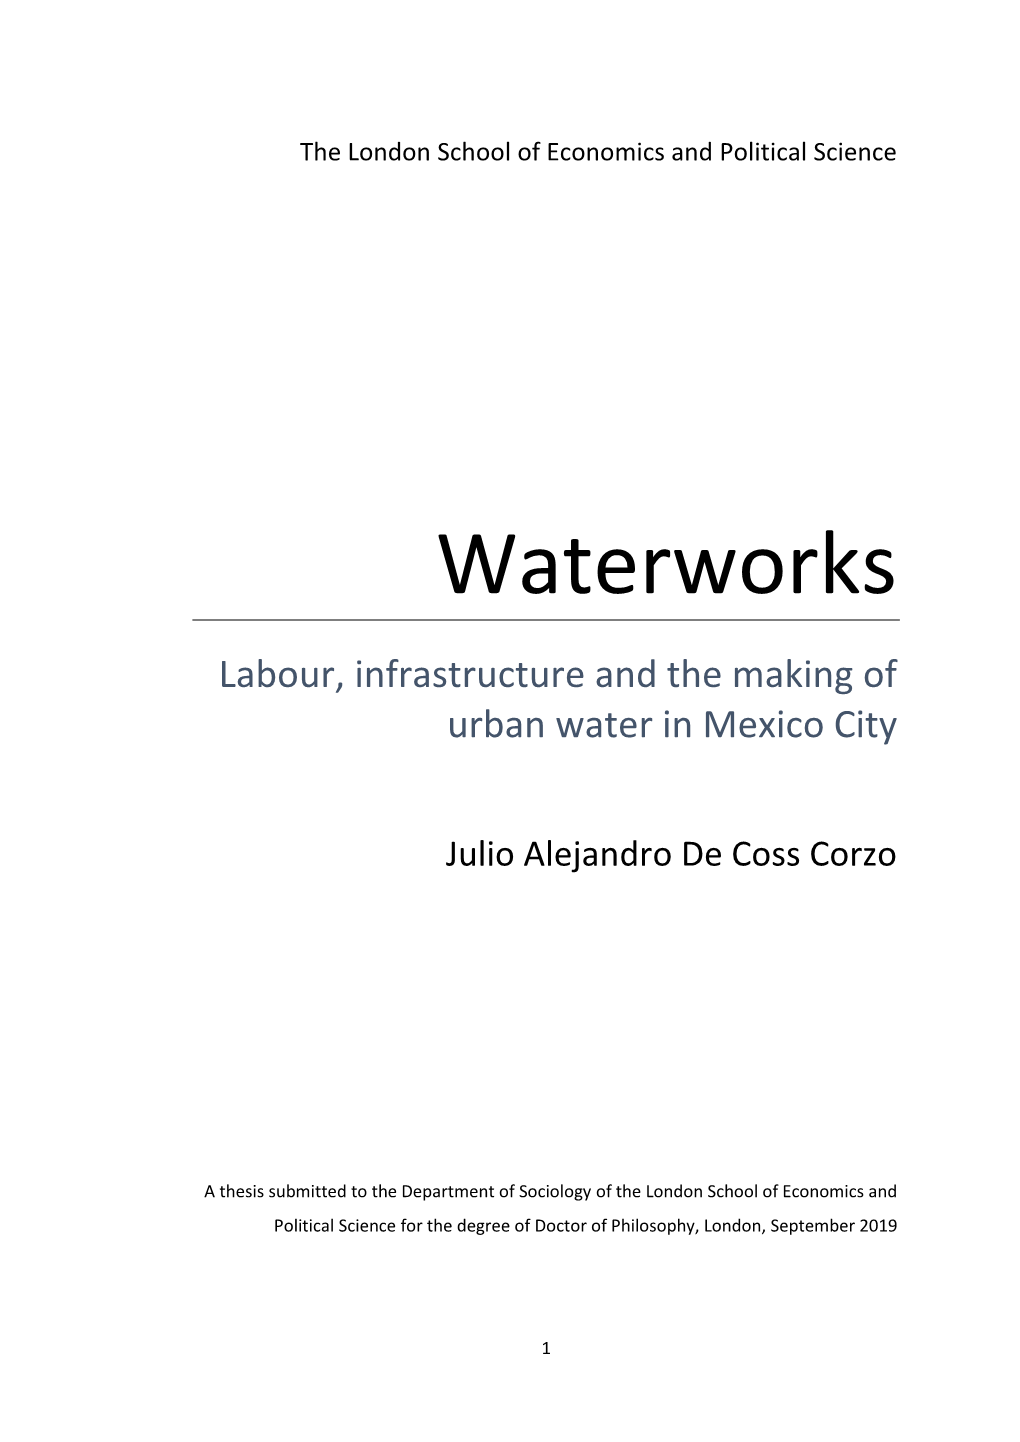 Waterworks Labour, Infrastructure and the Making of Urban Water in Mexico City